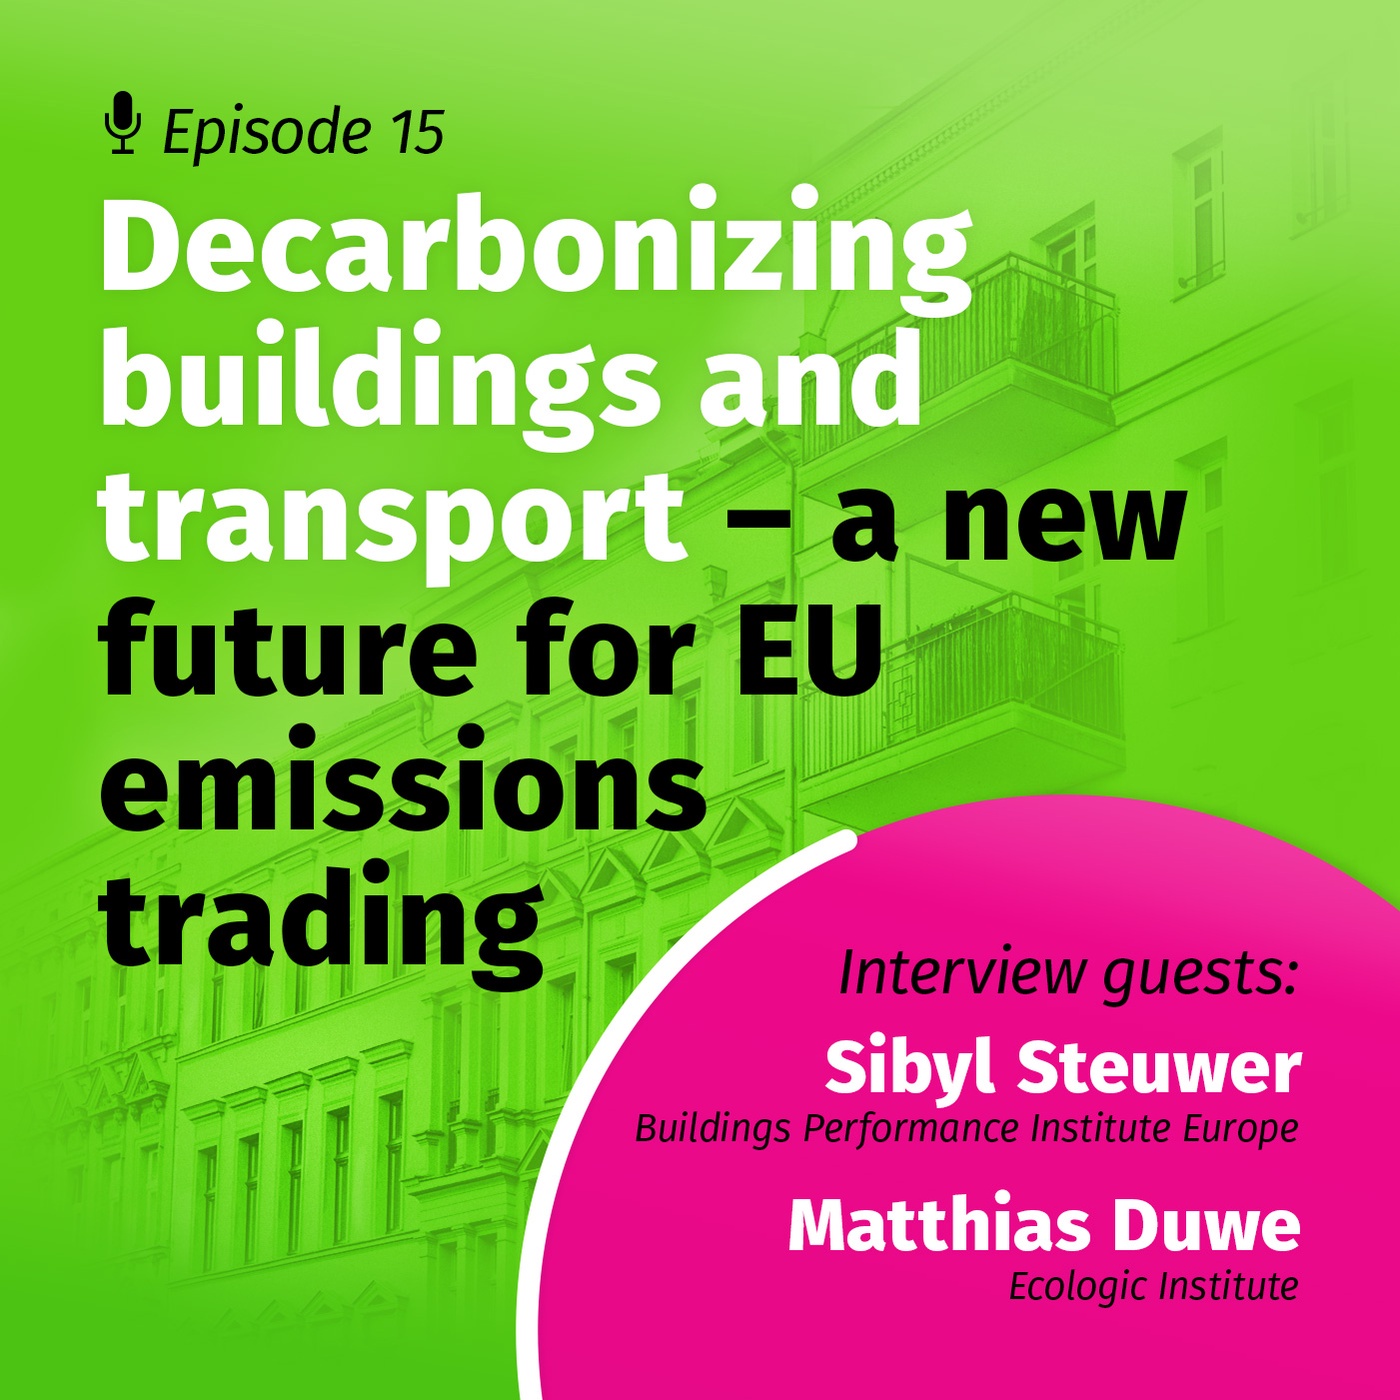 Decarbonizing buildings and transport - a new future for EU emissions trading